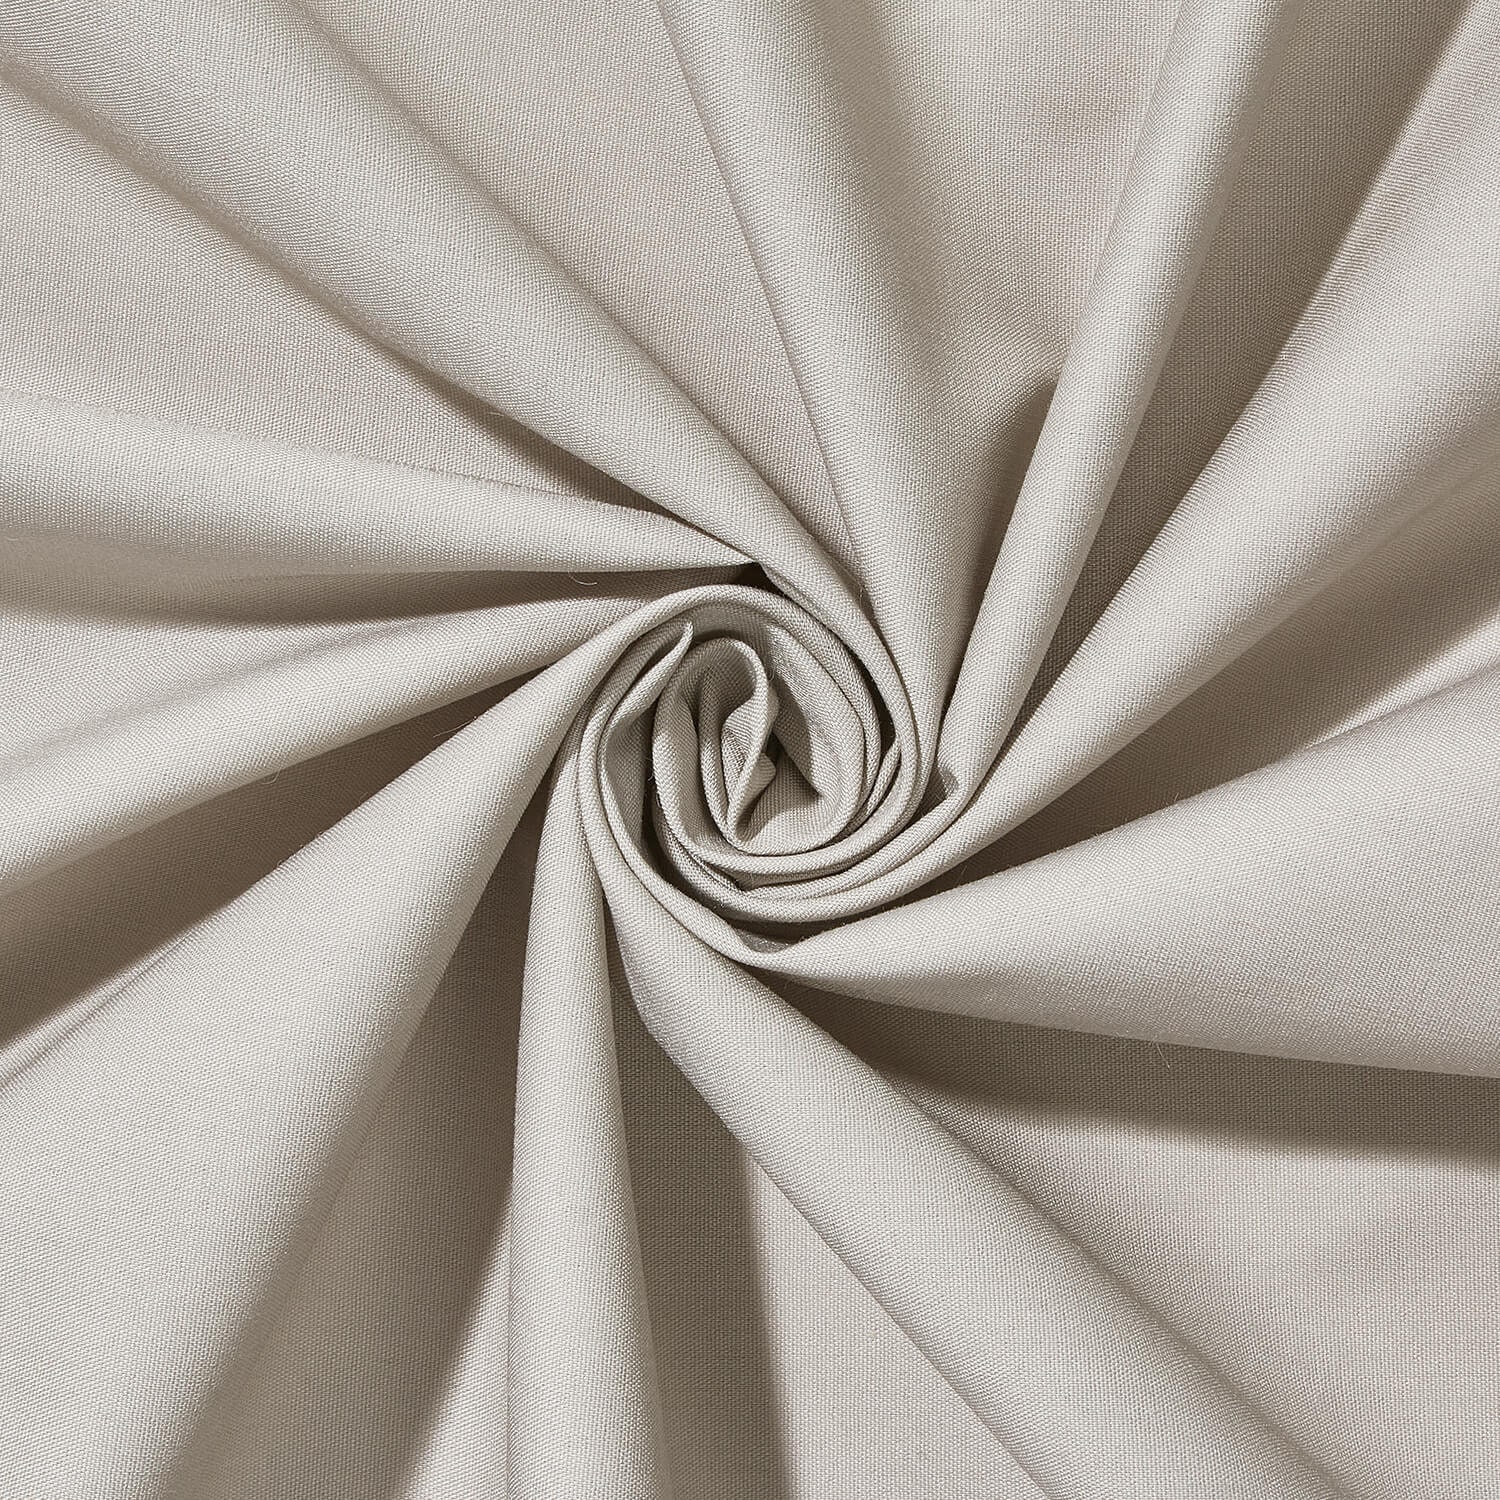 100% Cotton Broadcloth (58/59 inch) Fabric - White / Yard Many Colors Available